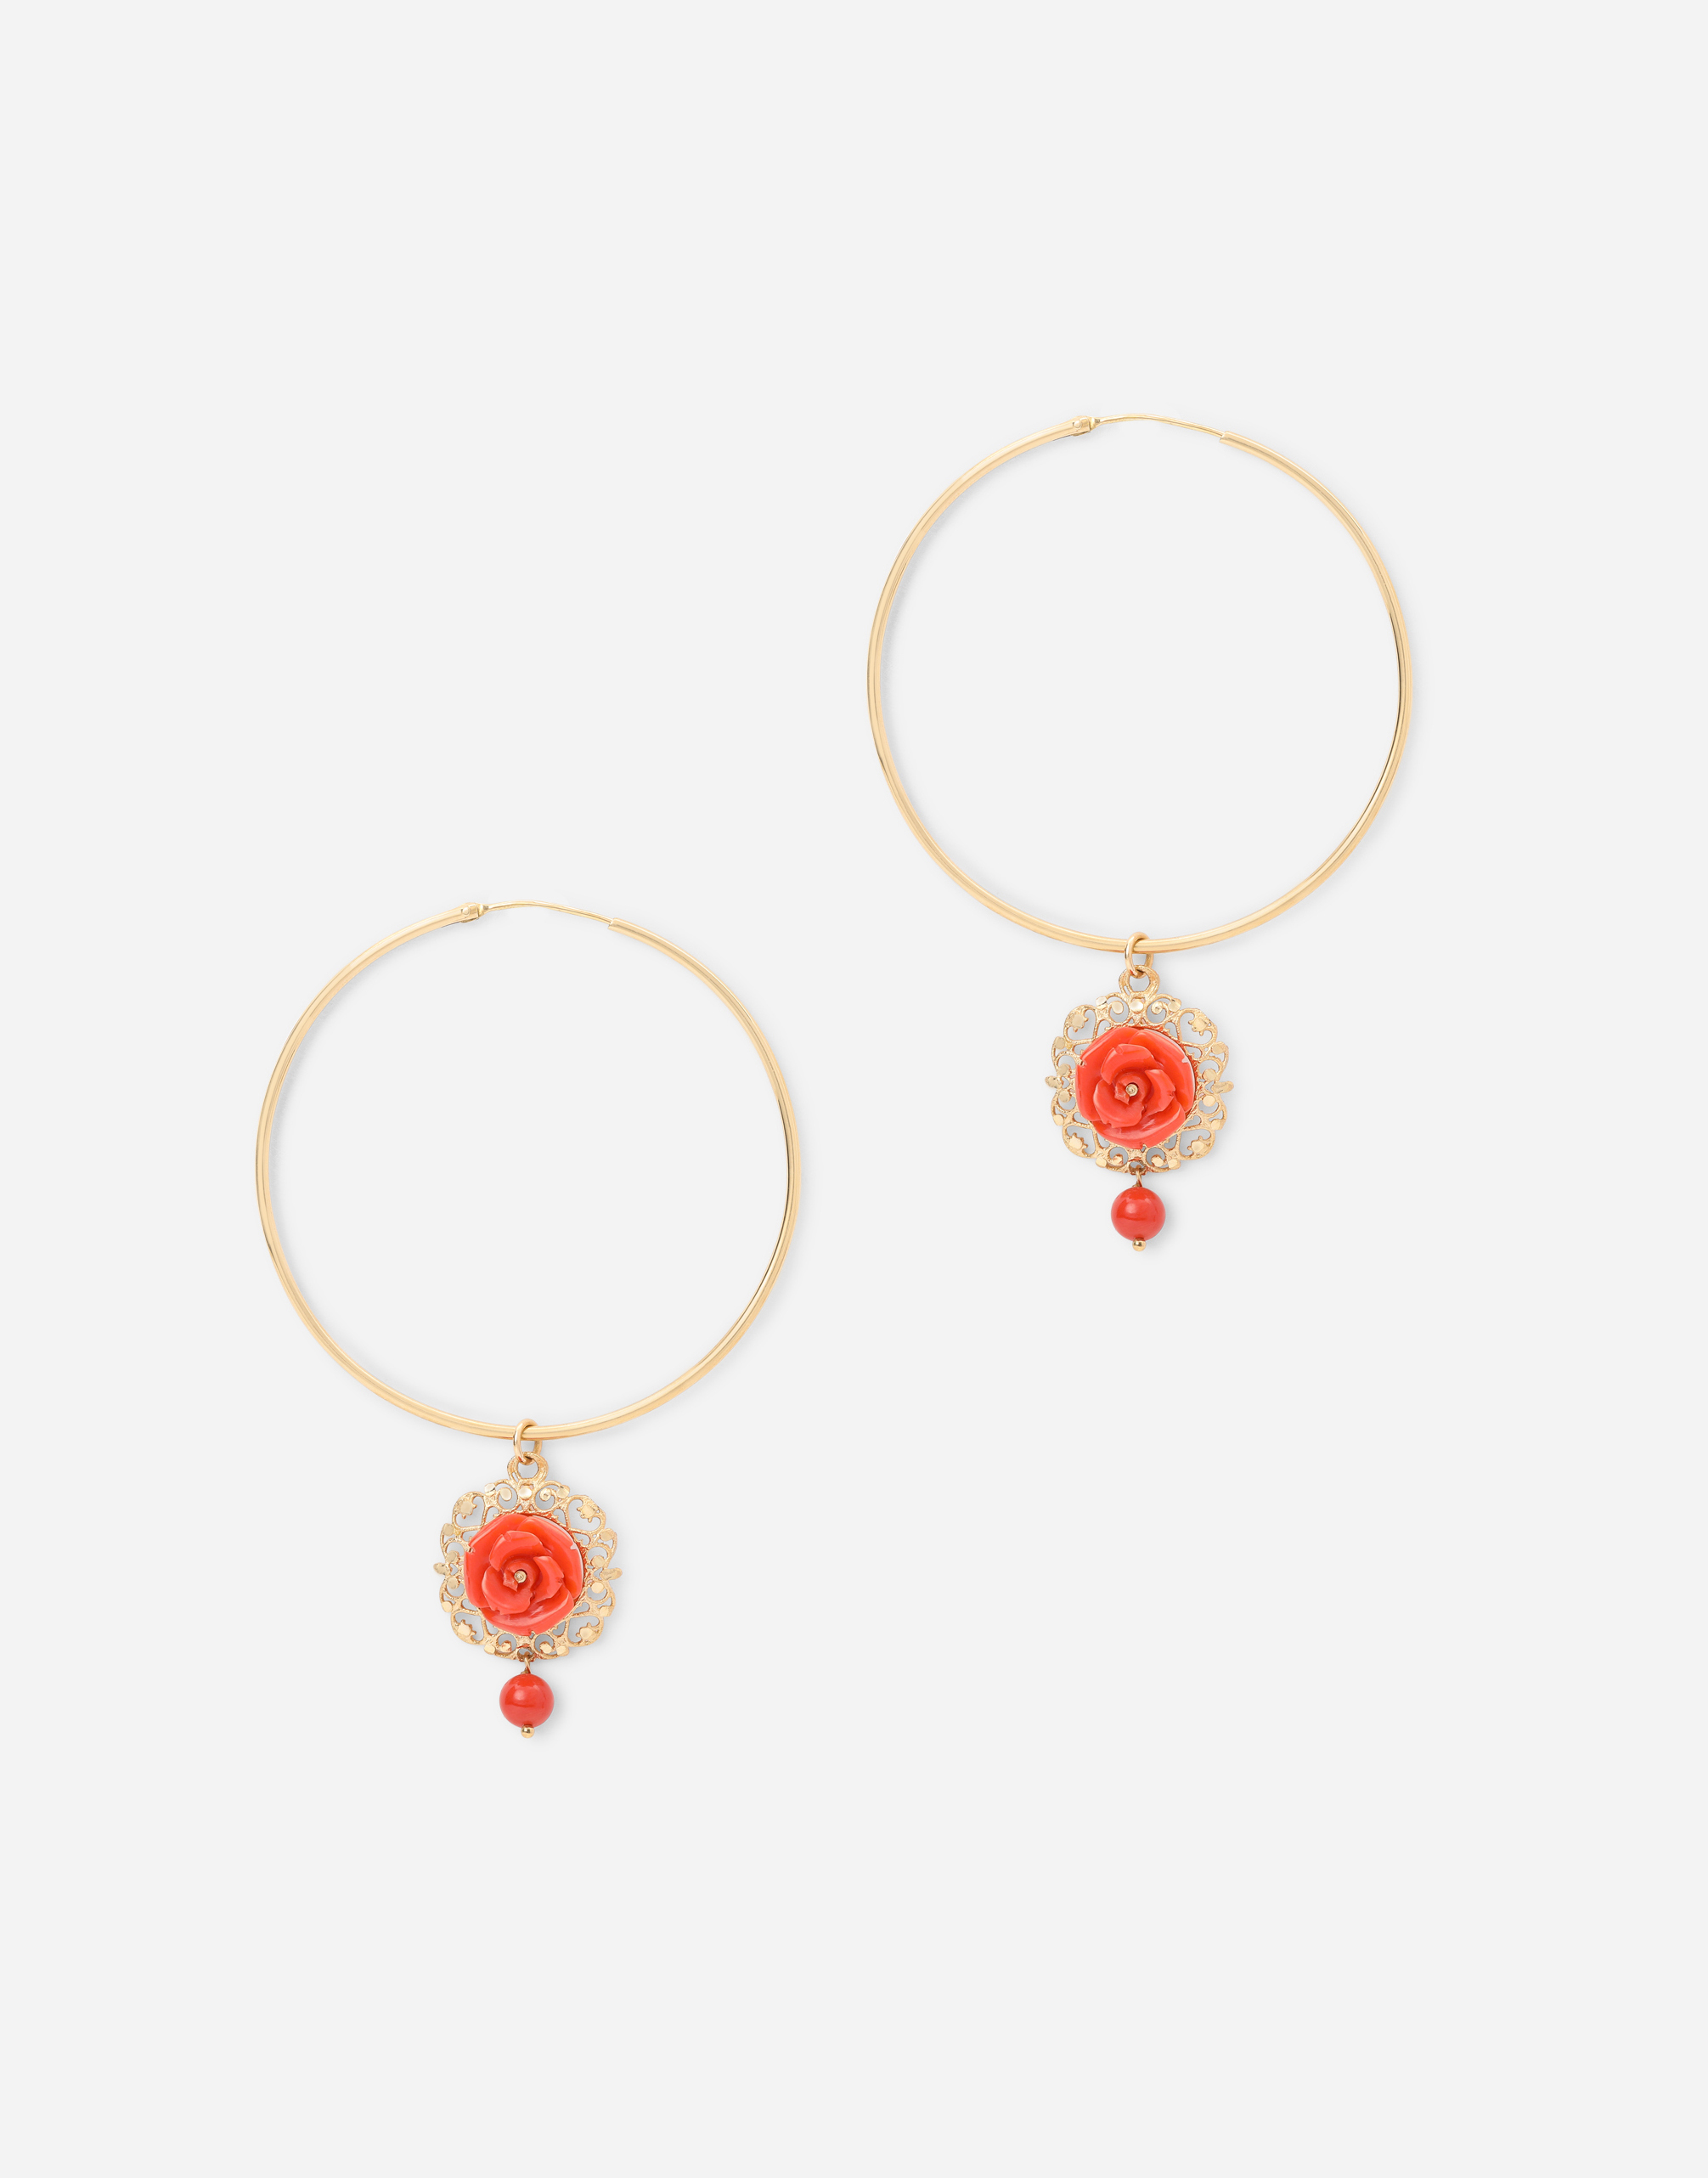 DOLCE & GABBANA CORAL LOOP EARRINGS IN YELLOW 18KT GOLD WITH CORAL ROSES GOLD FEMALE ONESIZE